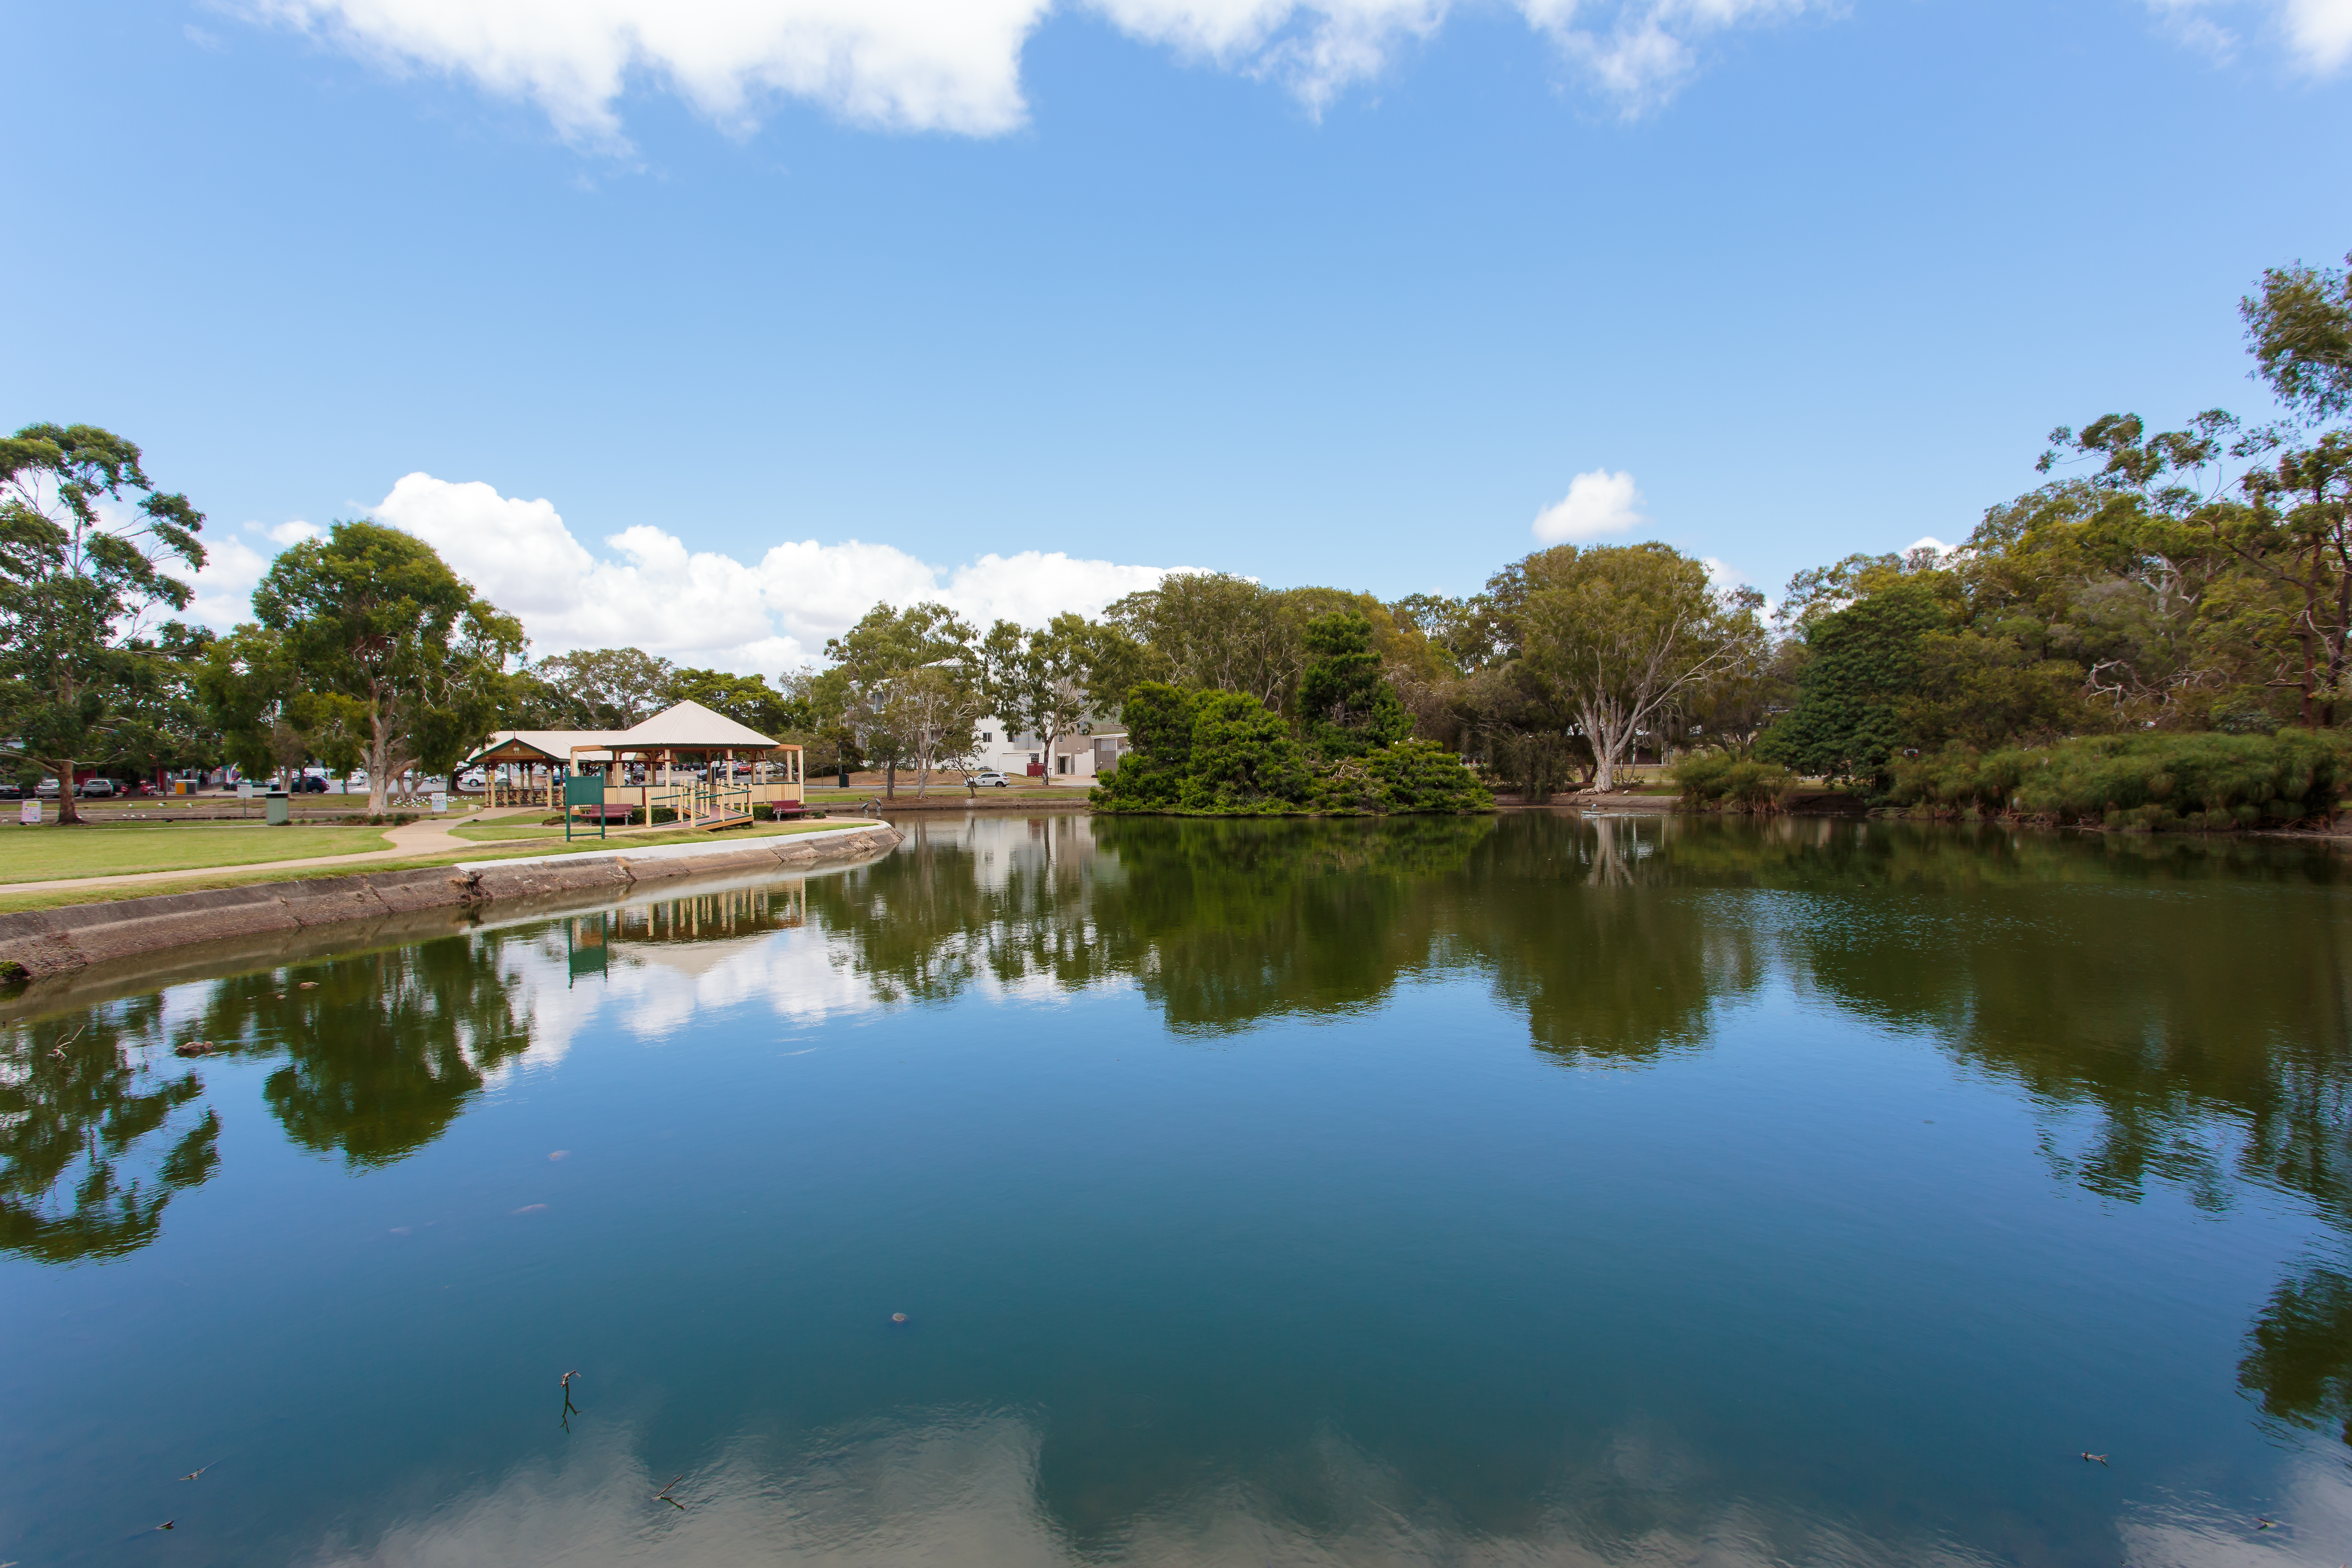 This is an image of the local heritage place known as Einbunpin Lagoon